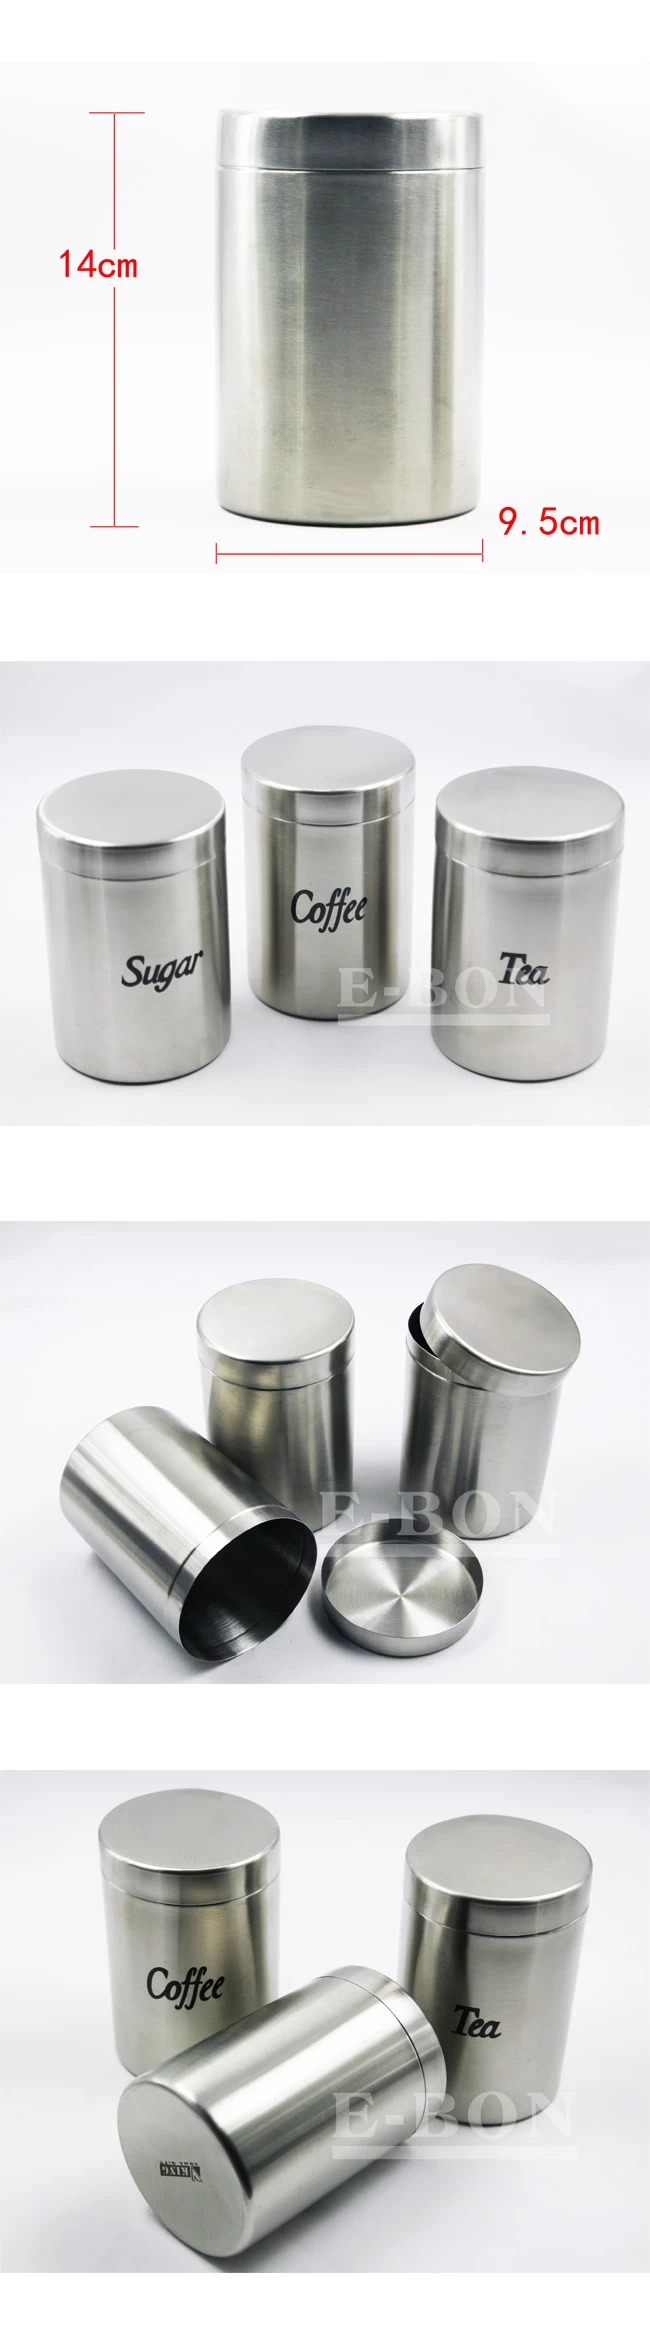 Stainless steel Canister